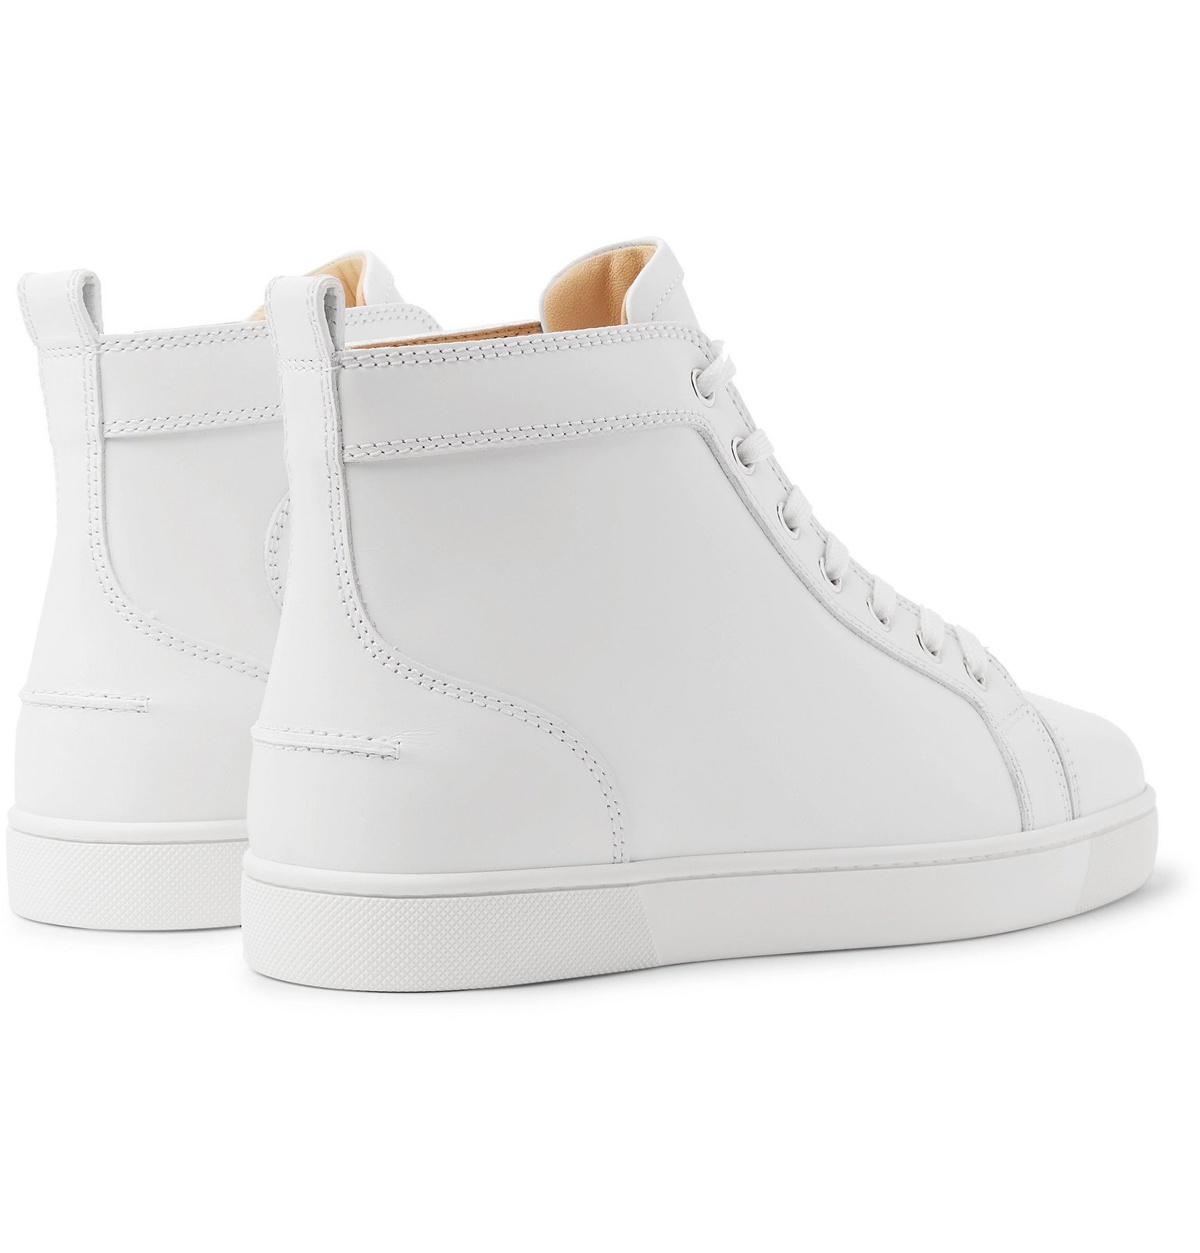 Shop Christian Louboutin Unisex Suede Street Style Plain Leather Logo  Sneakers by OPULENCE_TOKYO